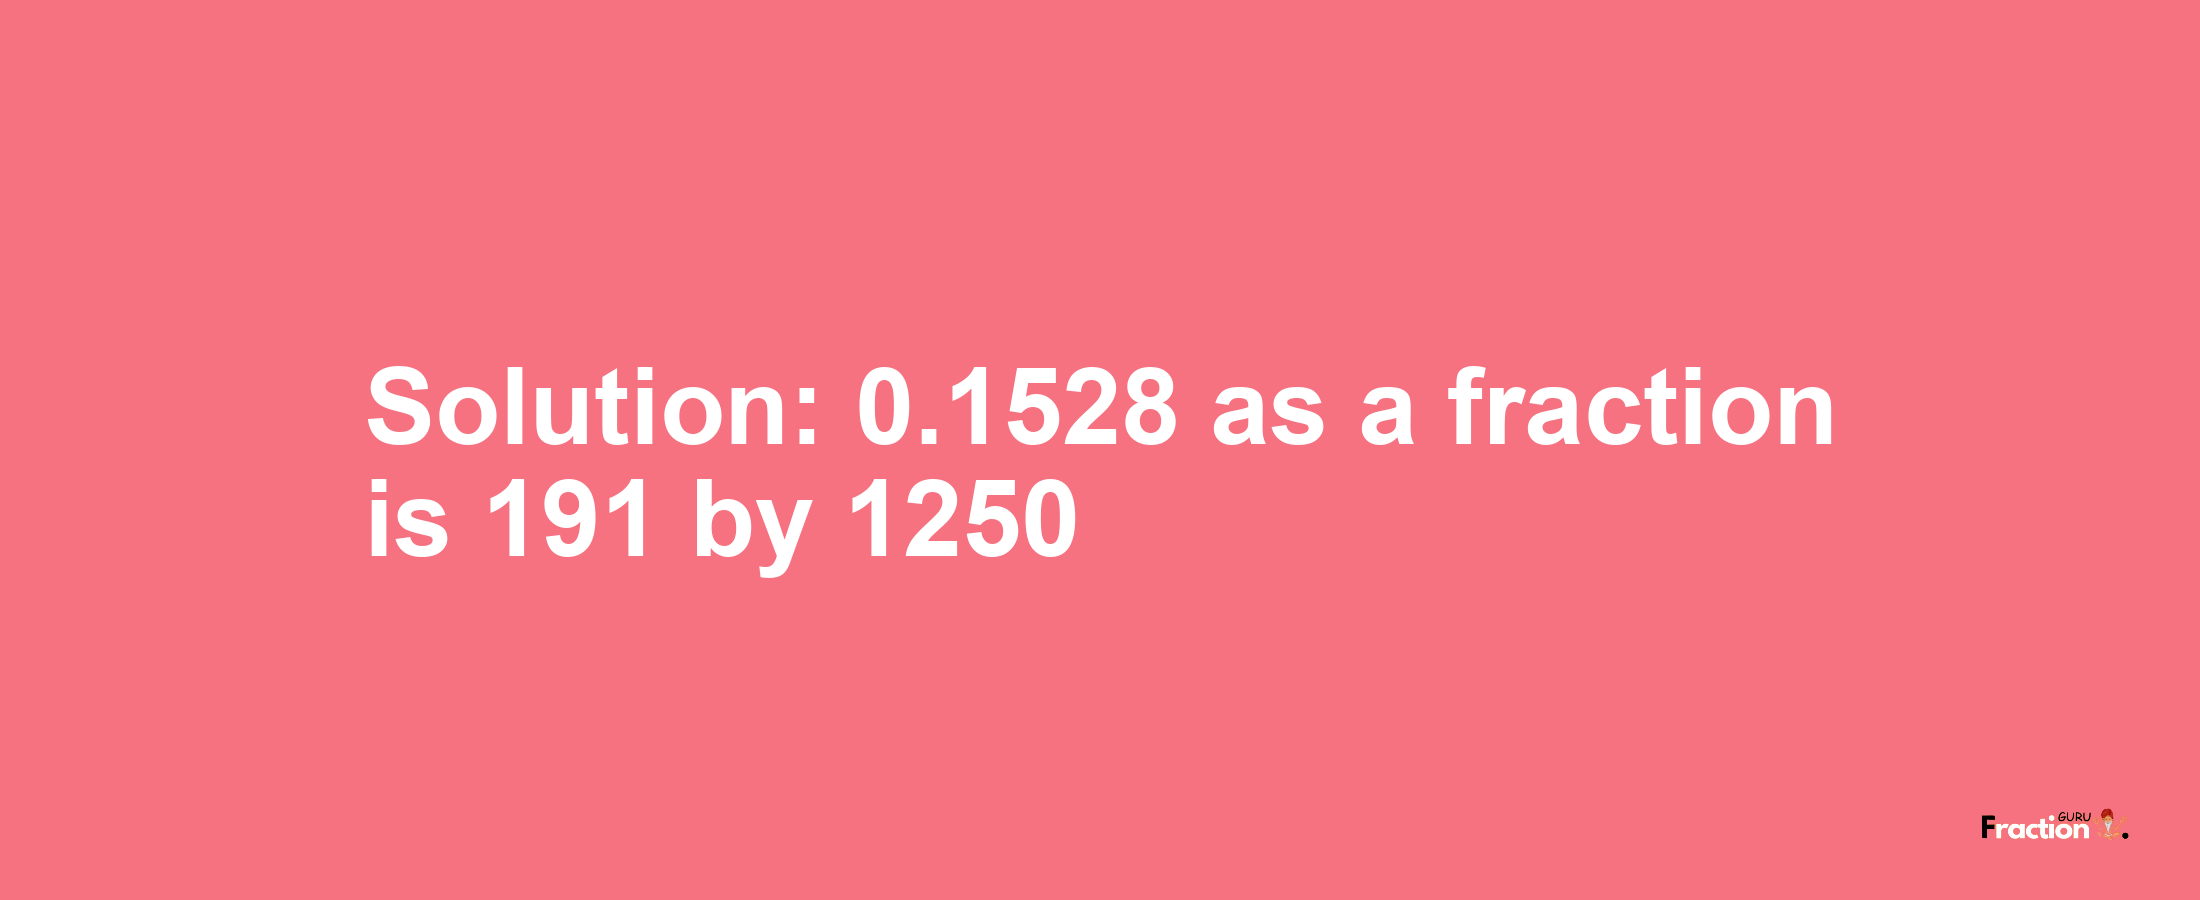 Solution:0.1528 as a fraction is 191/1250